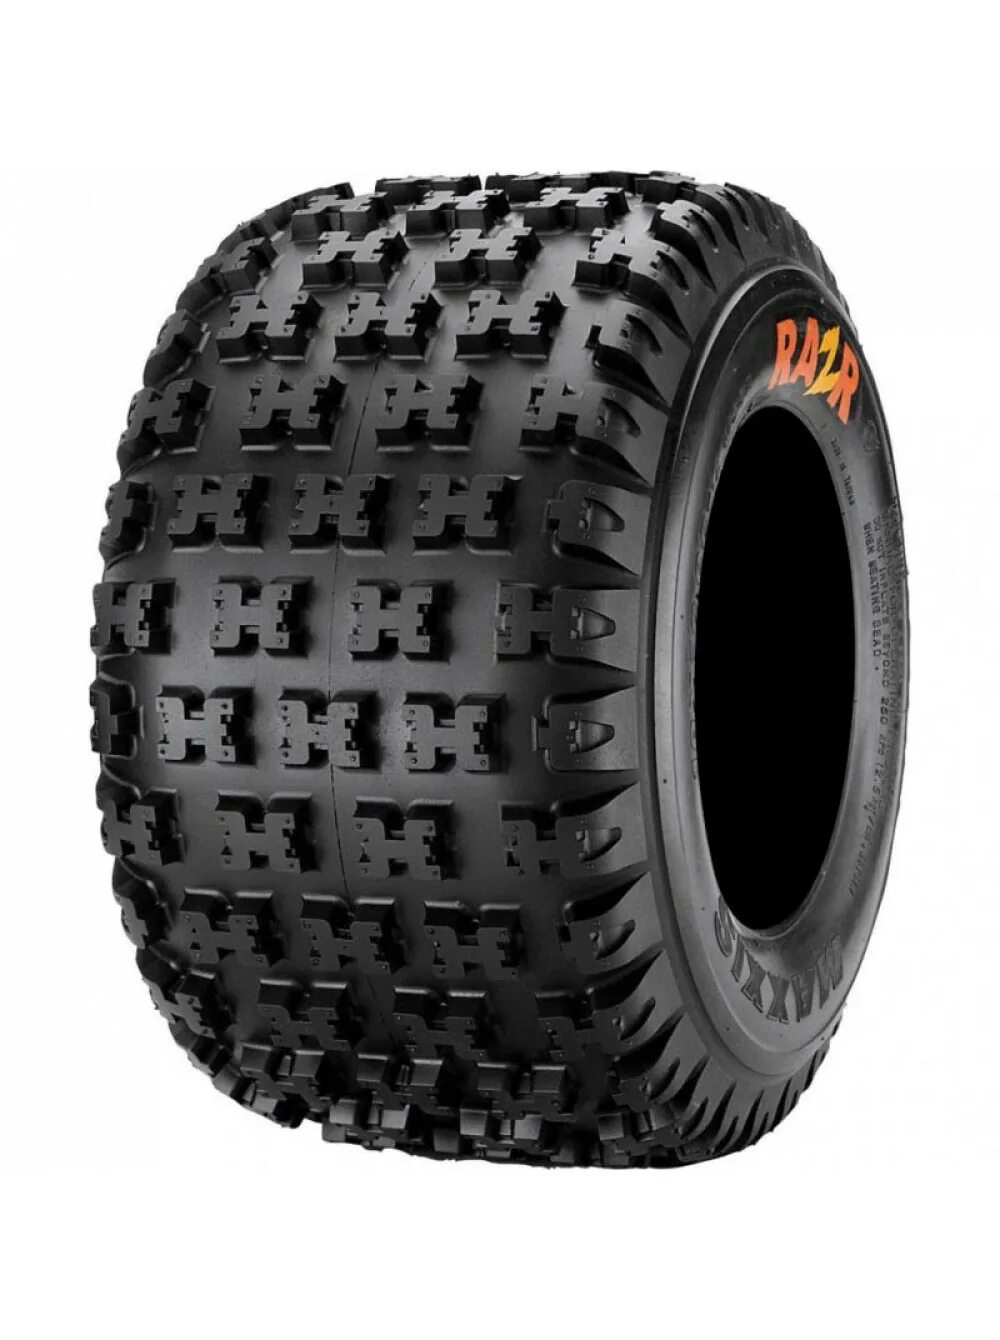 Шины maxis. Maxxis at18x9-8. Maxxis atv. Maxxis Tire 2022. Максис райзер АТ.